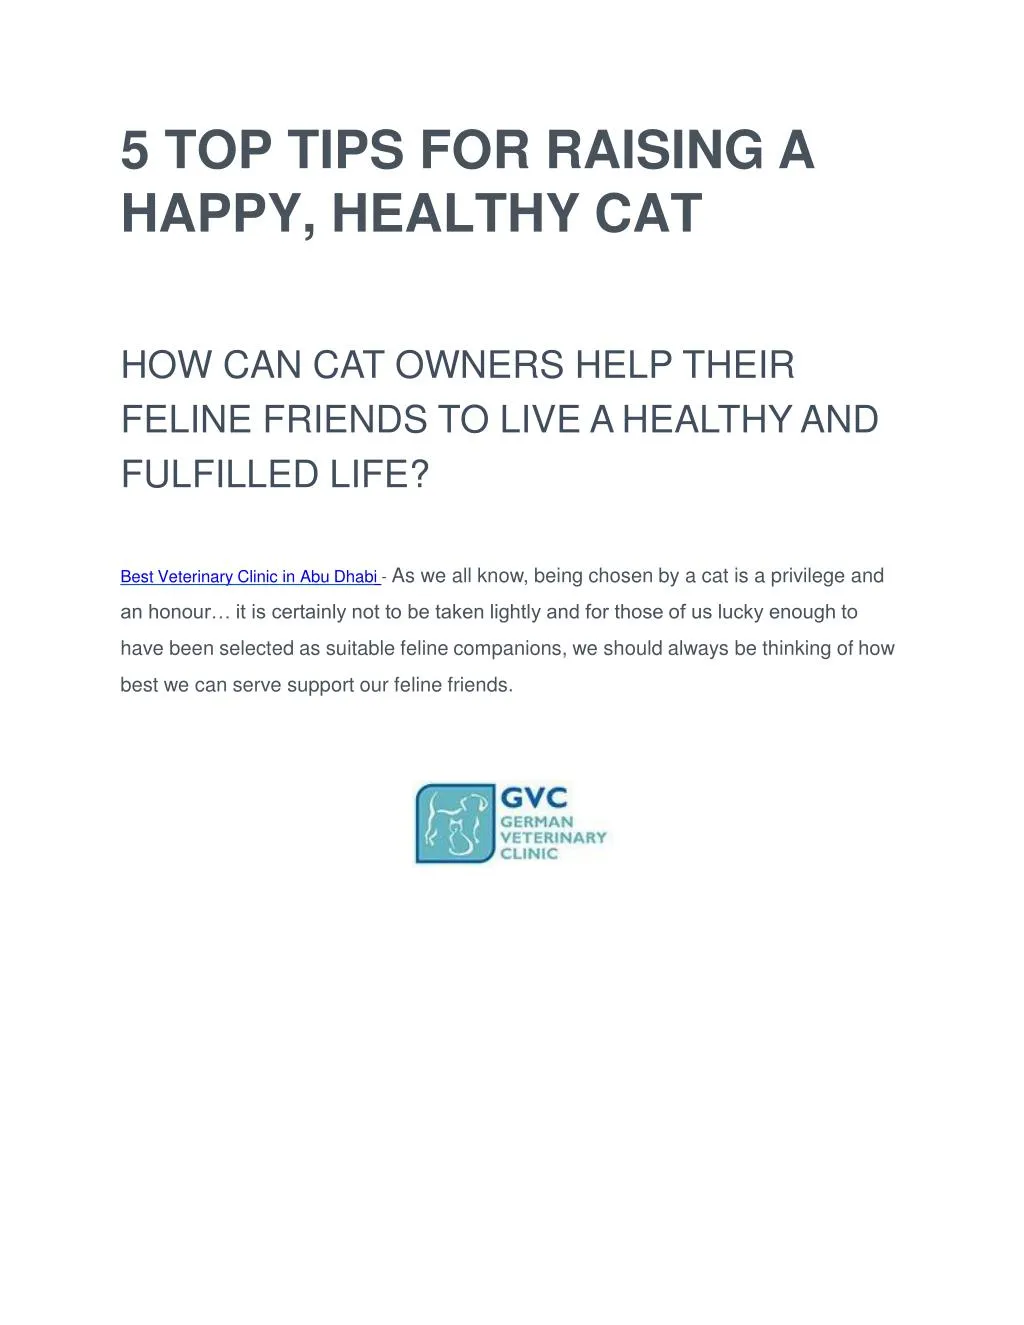 5 top tips for raising a happy healthy cat